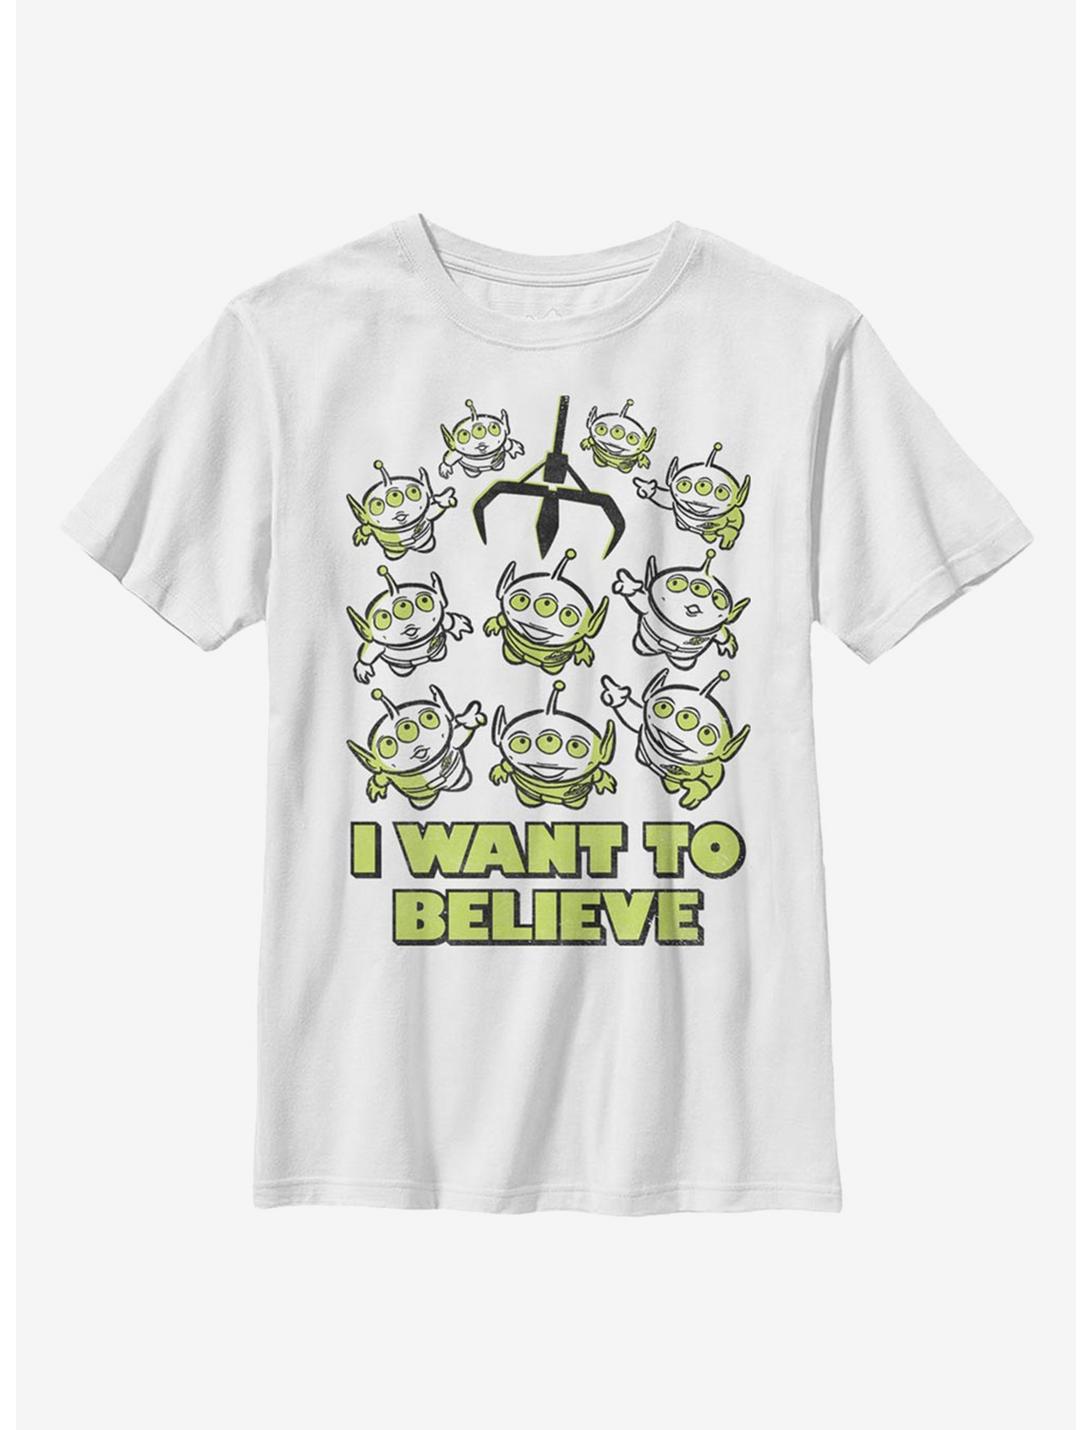 Disney Pixar Toy Story I Want To Believe Youth T-Shirt, WHITE, hi-res